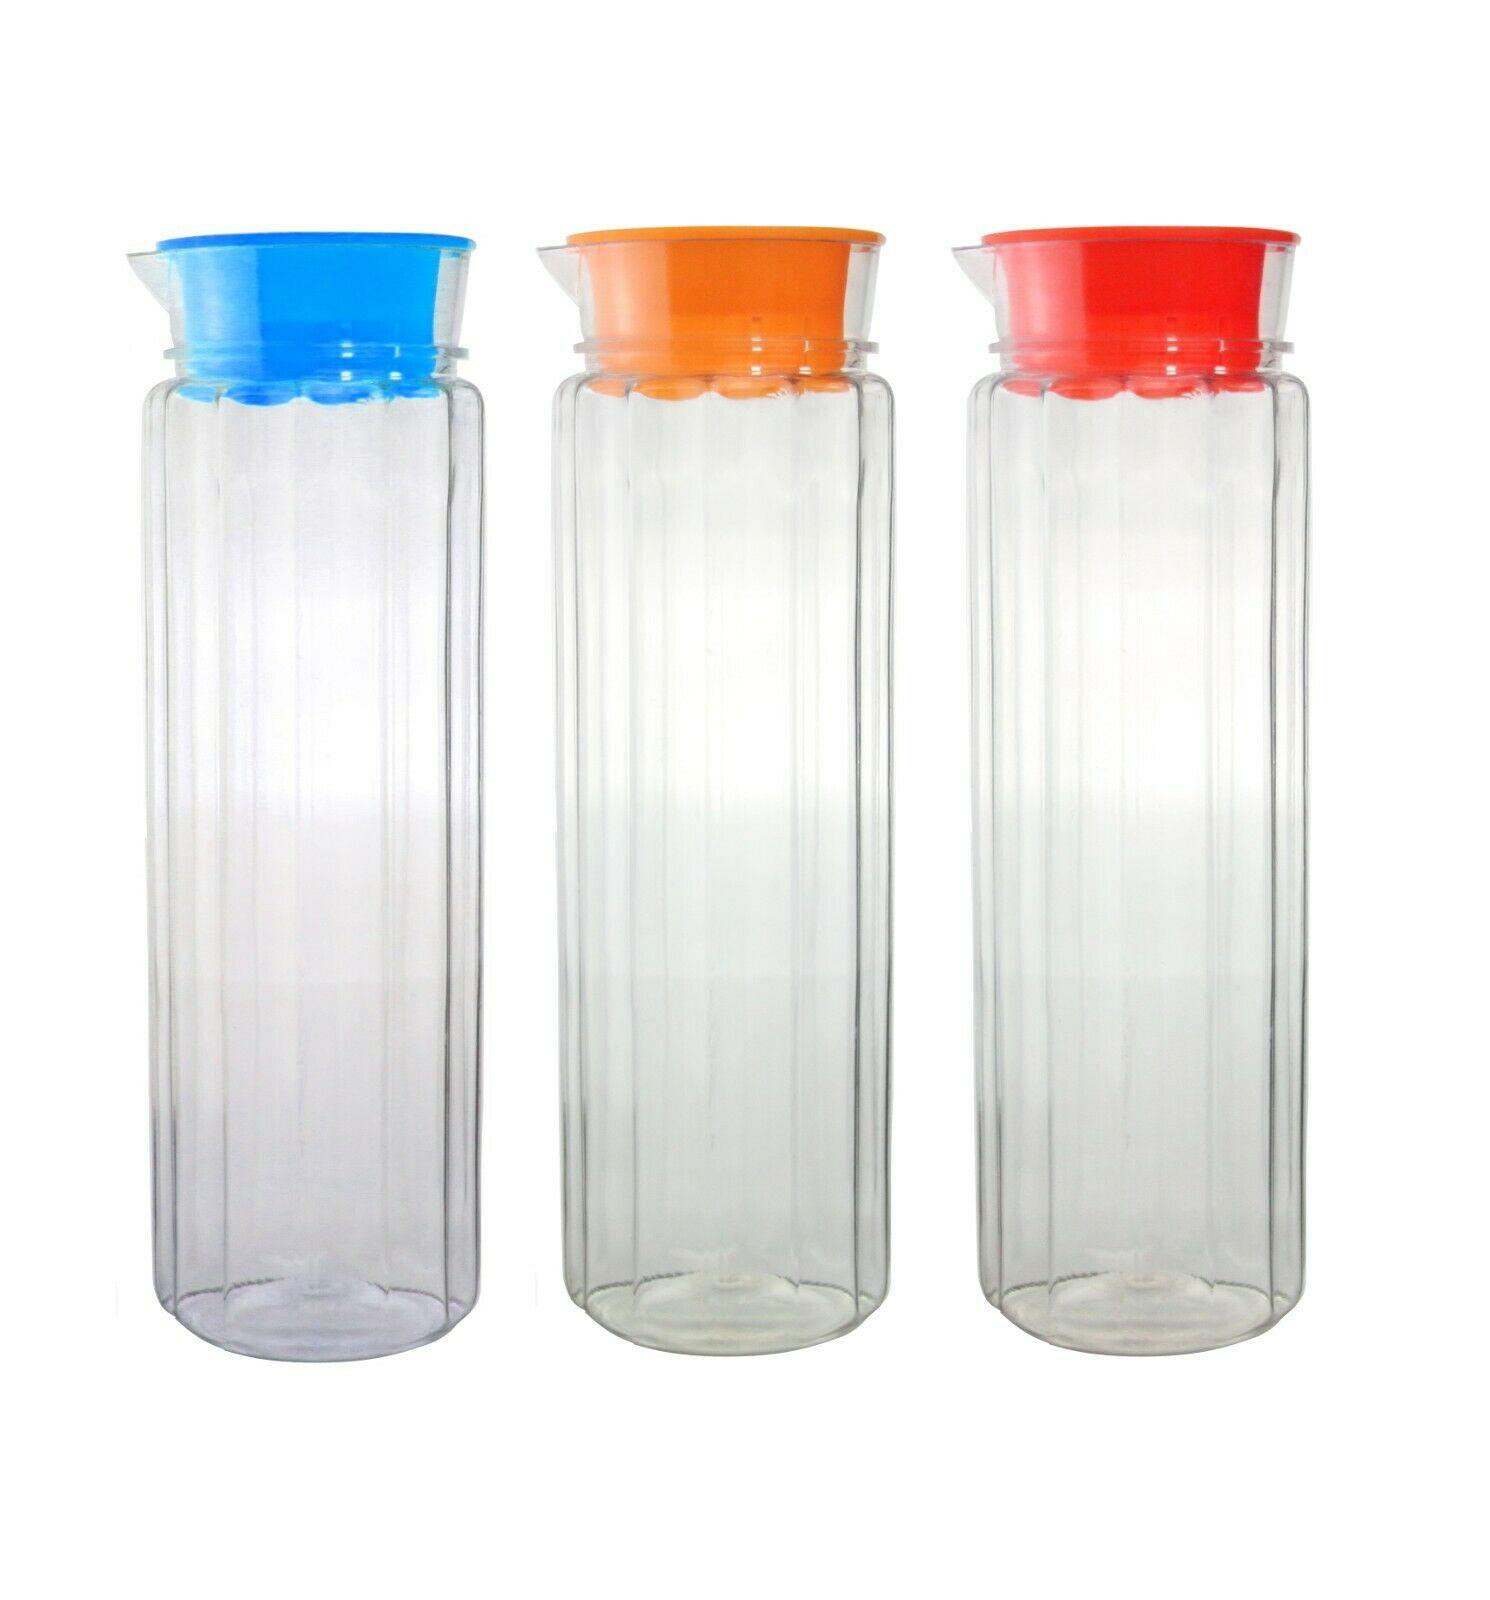 Mix Color, 6 1 Liter Plastic Water Fruit Juices Jug Milk with Lid and Easy in Pouring